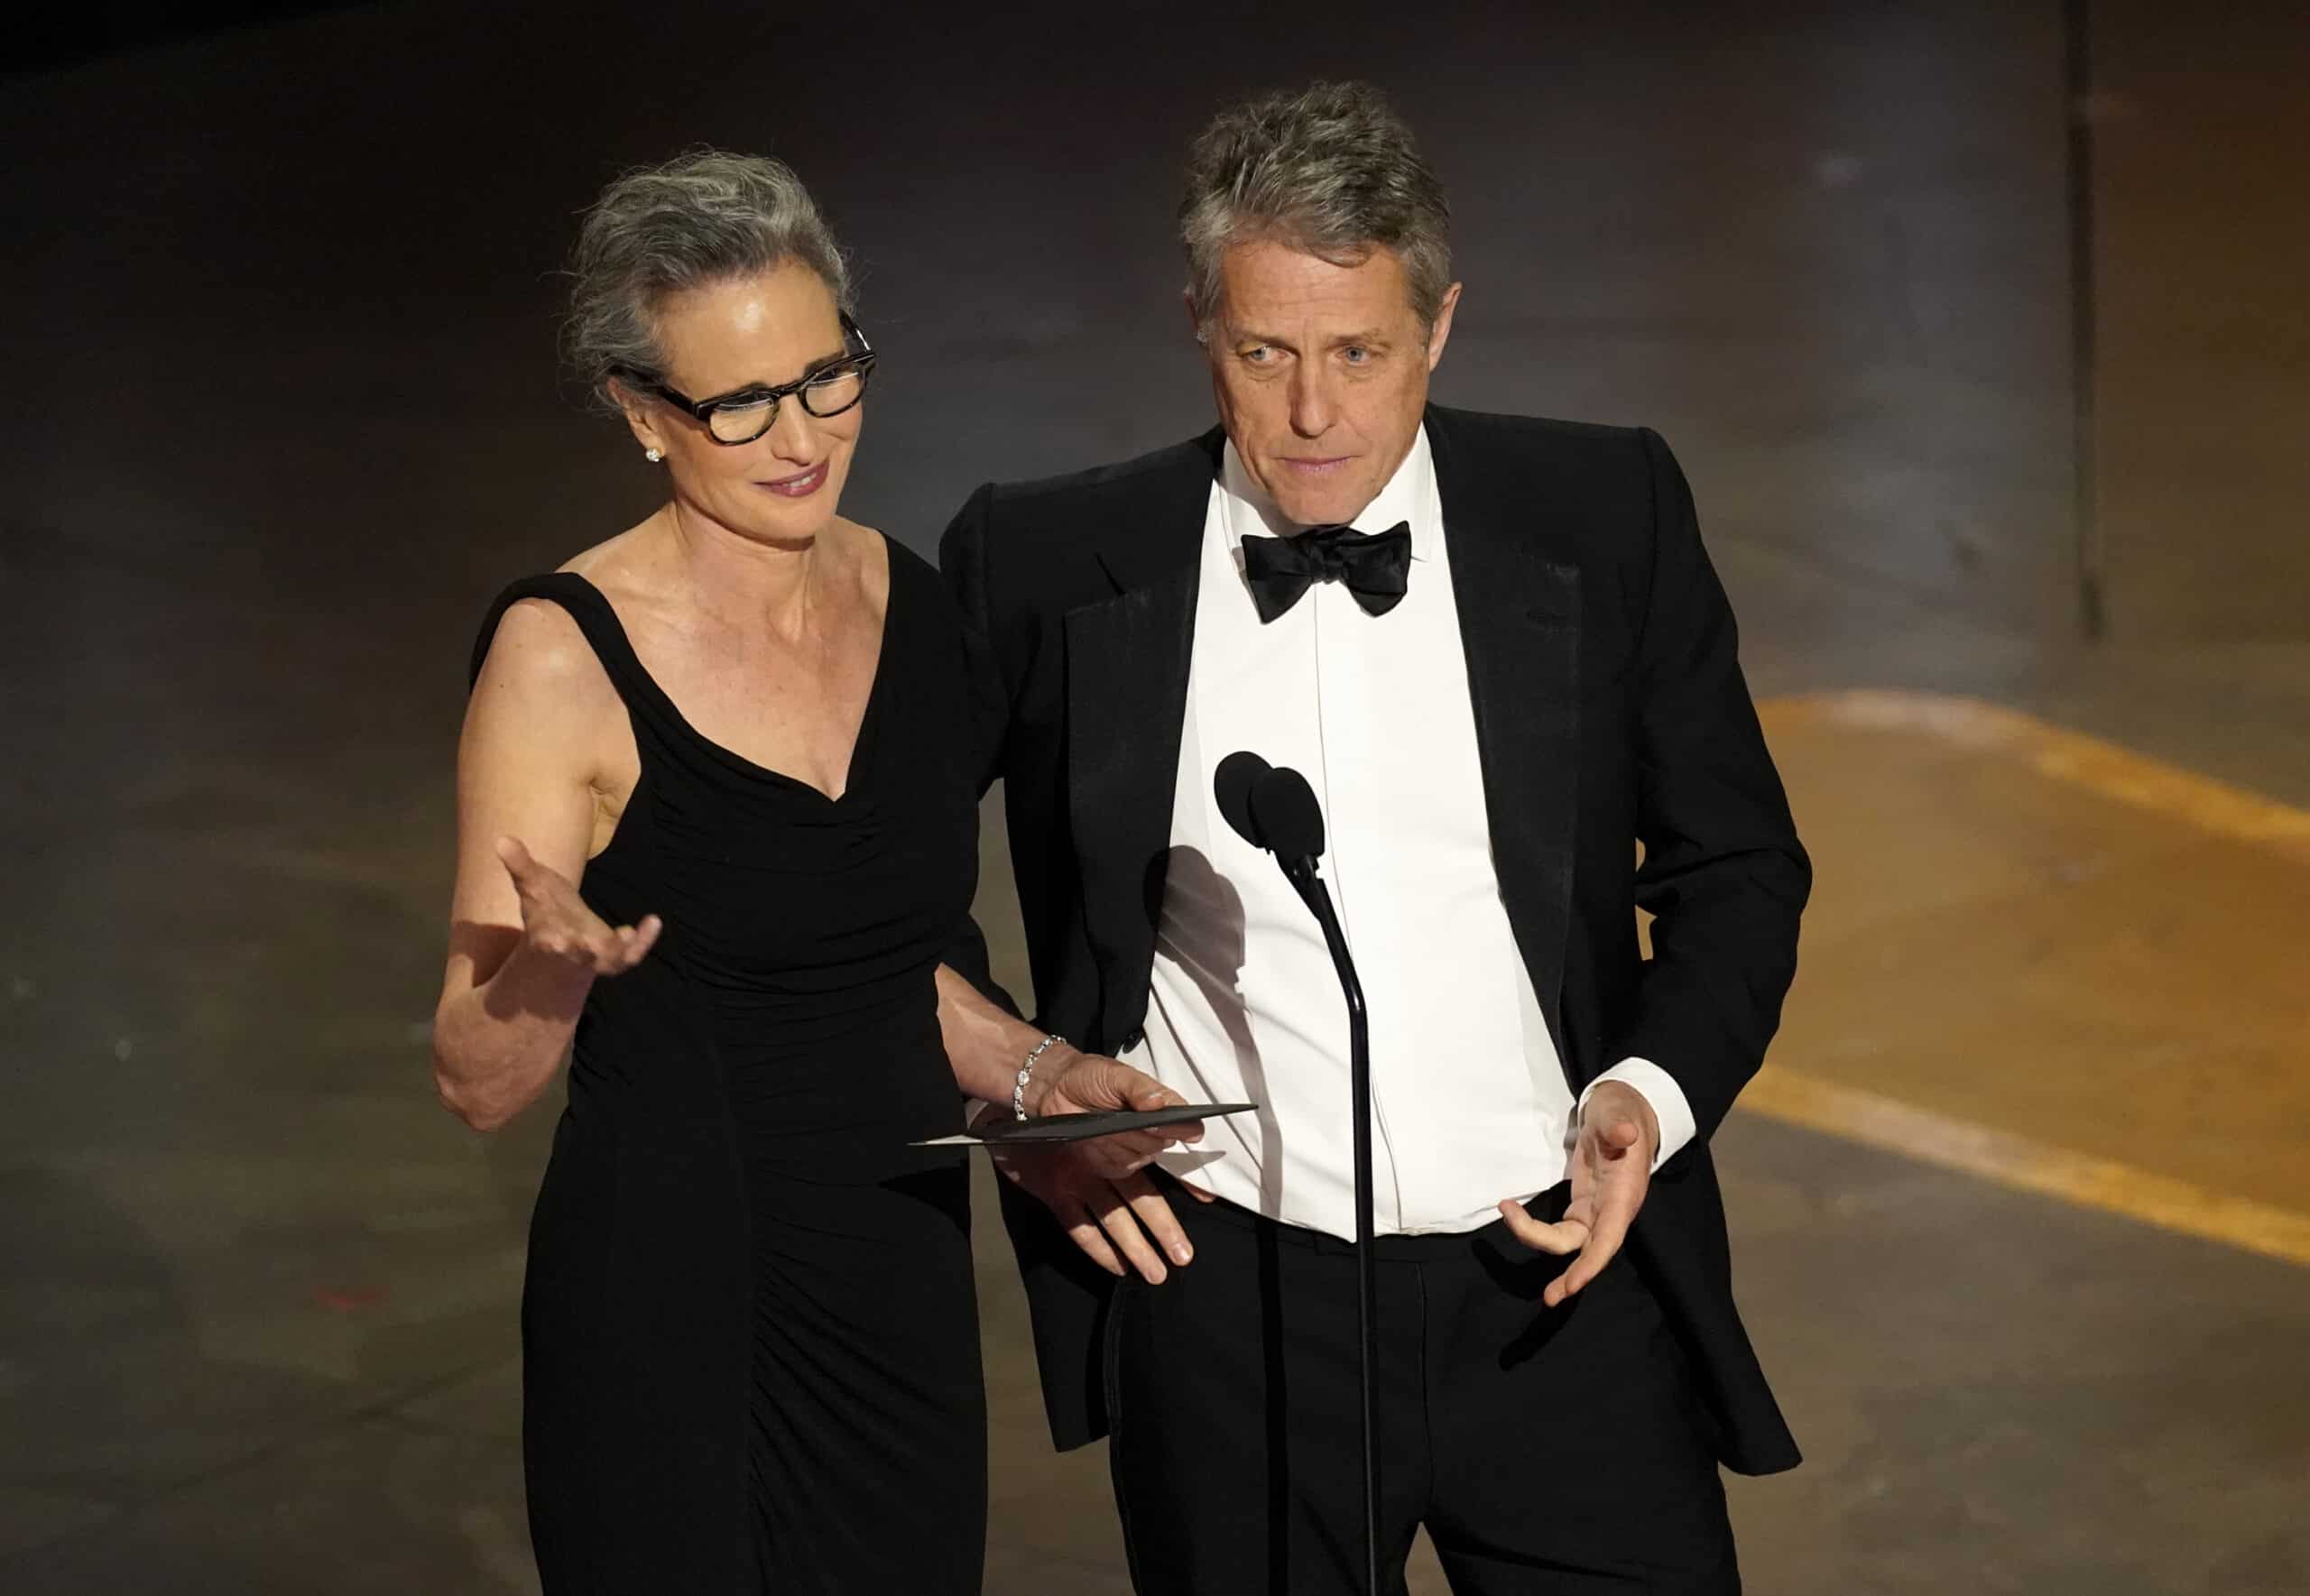 Hugh Grant gets props for indifferent Oscars interview